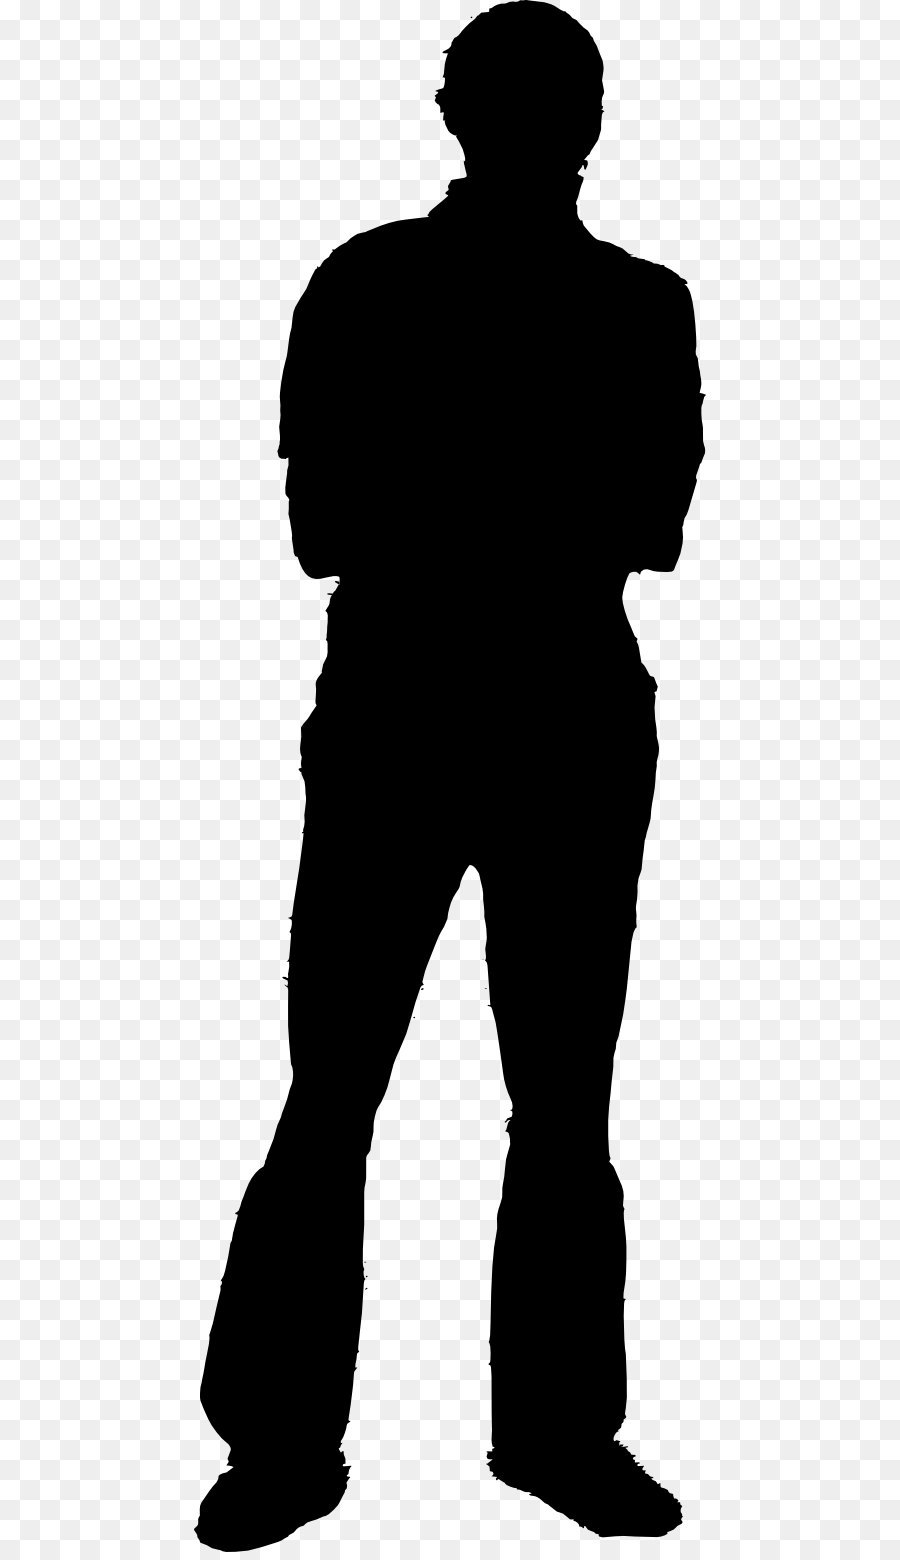 Silhouette Homo sapiens Human body Clip art - Silhouette Free Png Image png download - 512*1552 - Free Transparent Silhouette png Download.